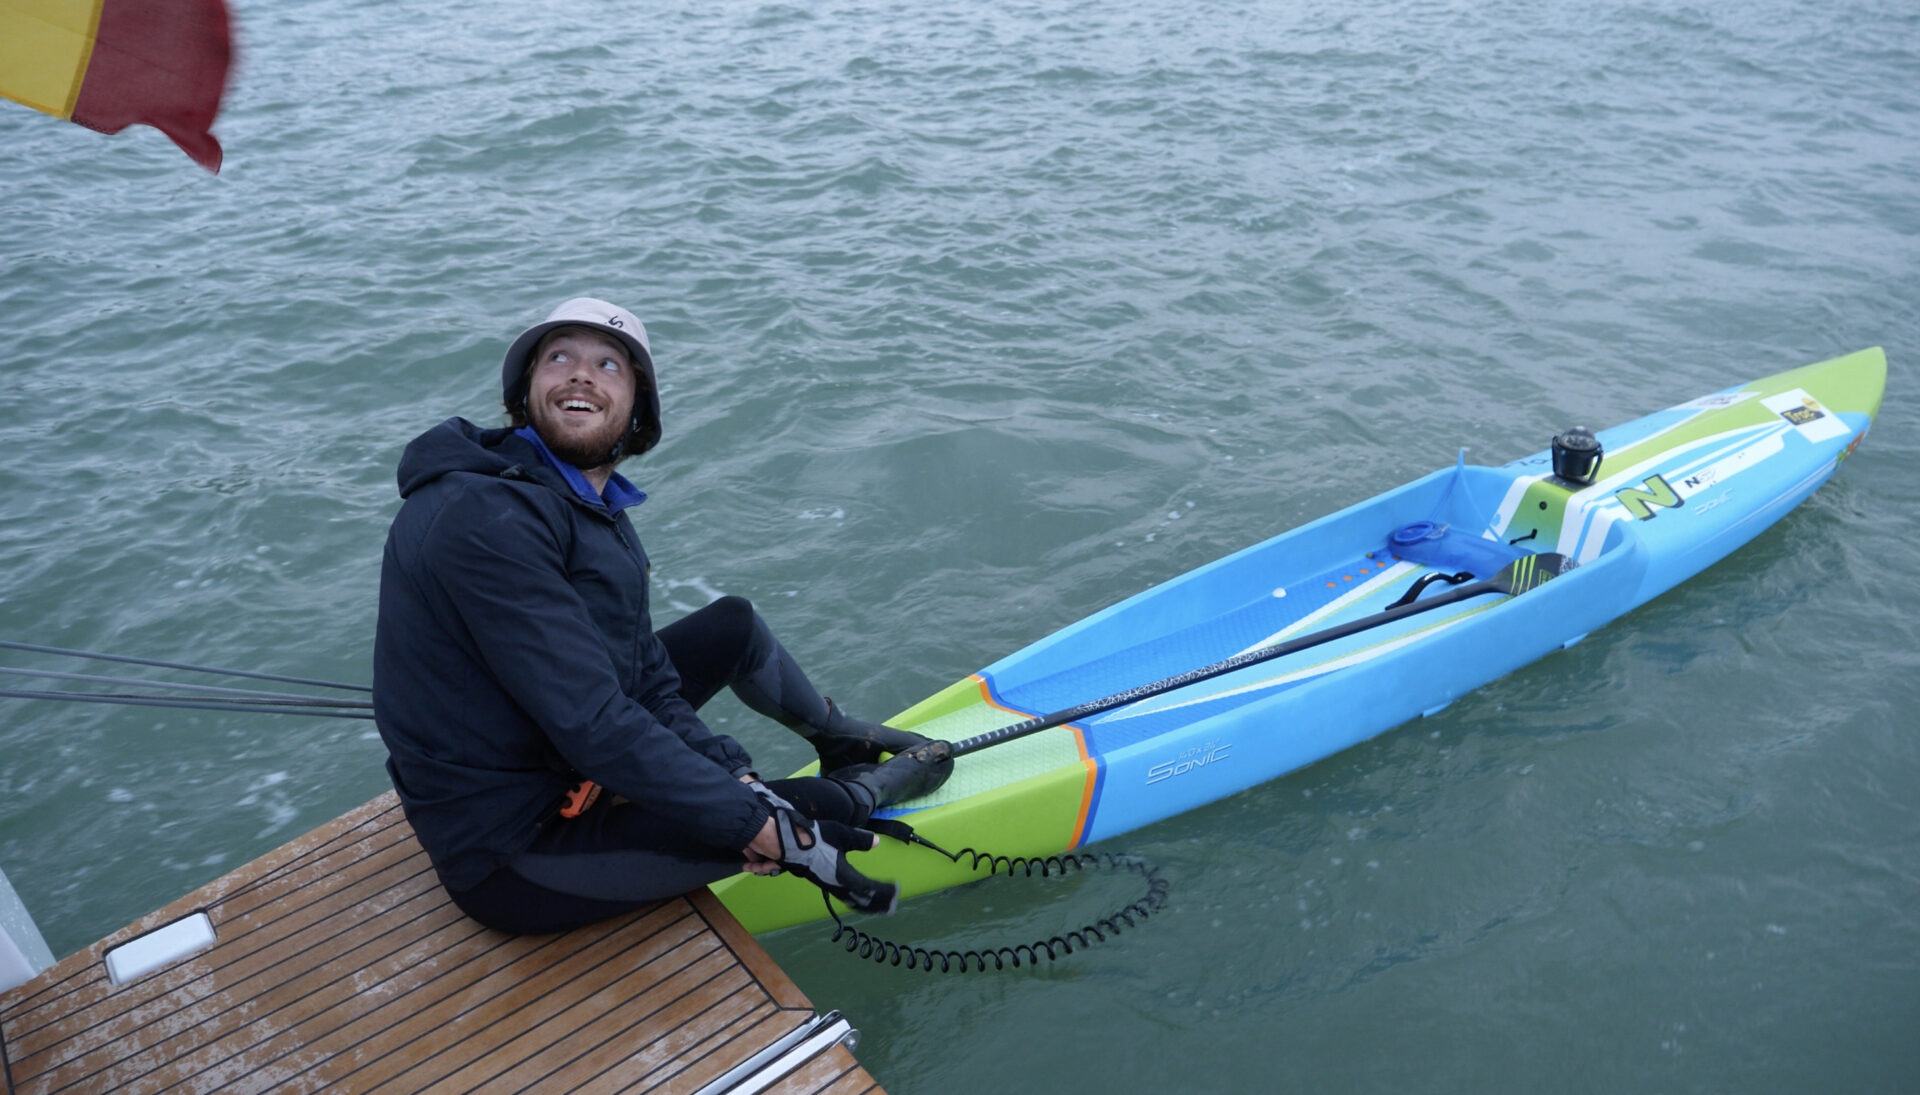 World Record For Crossing The English Channel On A Paddleboard!